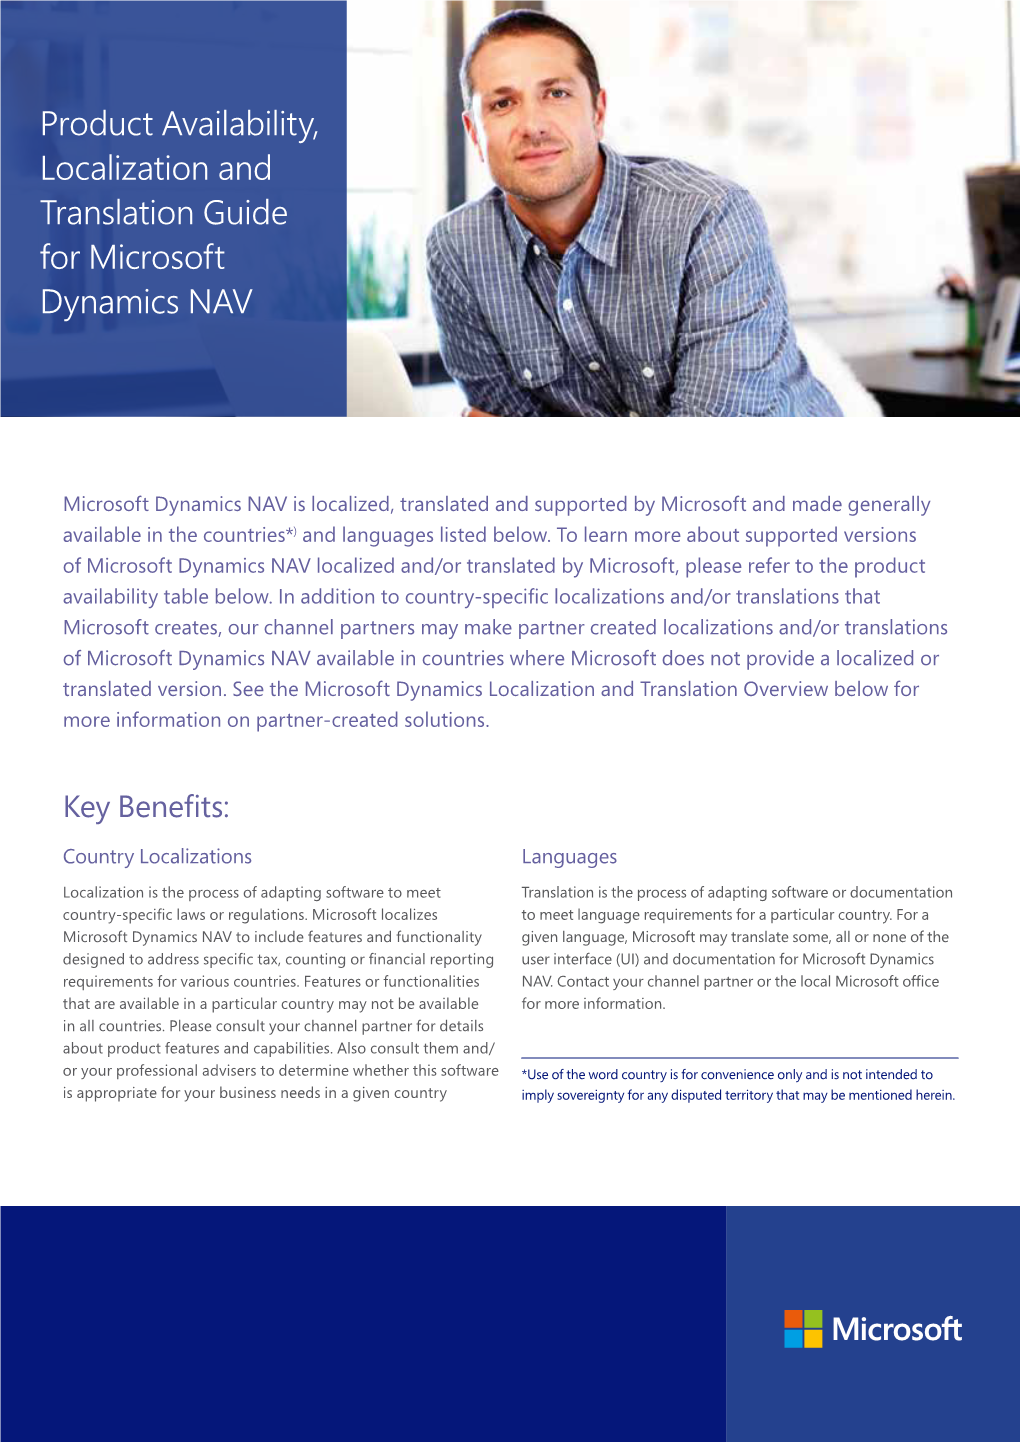 Product Availability, Localization, and Translation Guide for Microsoft